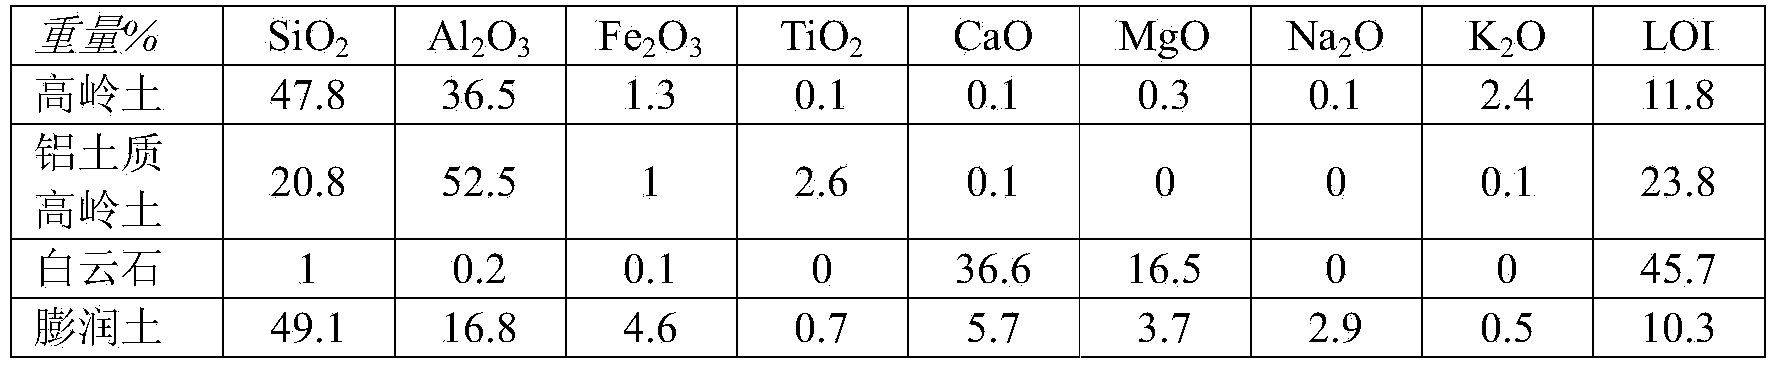 Mineral additive blend compositions and methods for operating combustors for avoiding problems such as agglomeration, deposition, corrosion and reducing emissions